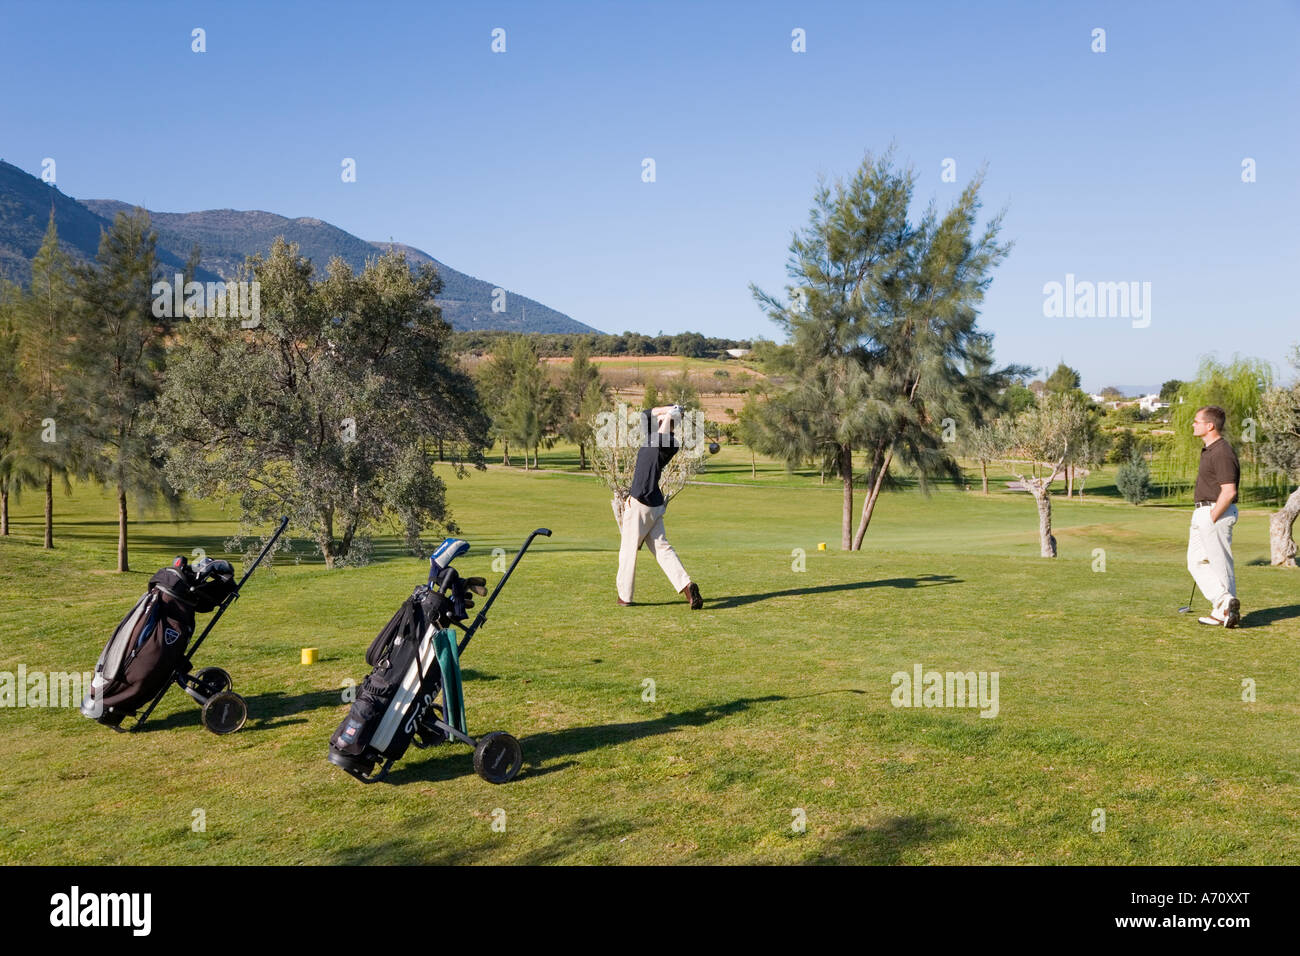 Alhaurin de la Torre,  Malaga Province,  inland Costa del Sol, southern Spain.  Lauro Golf course. Two men playing Stock Photo